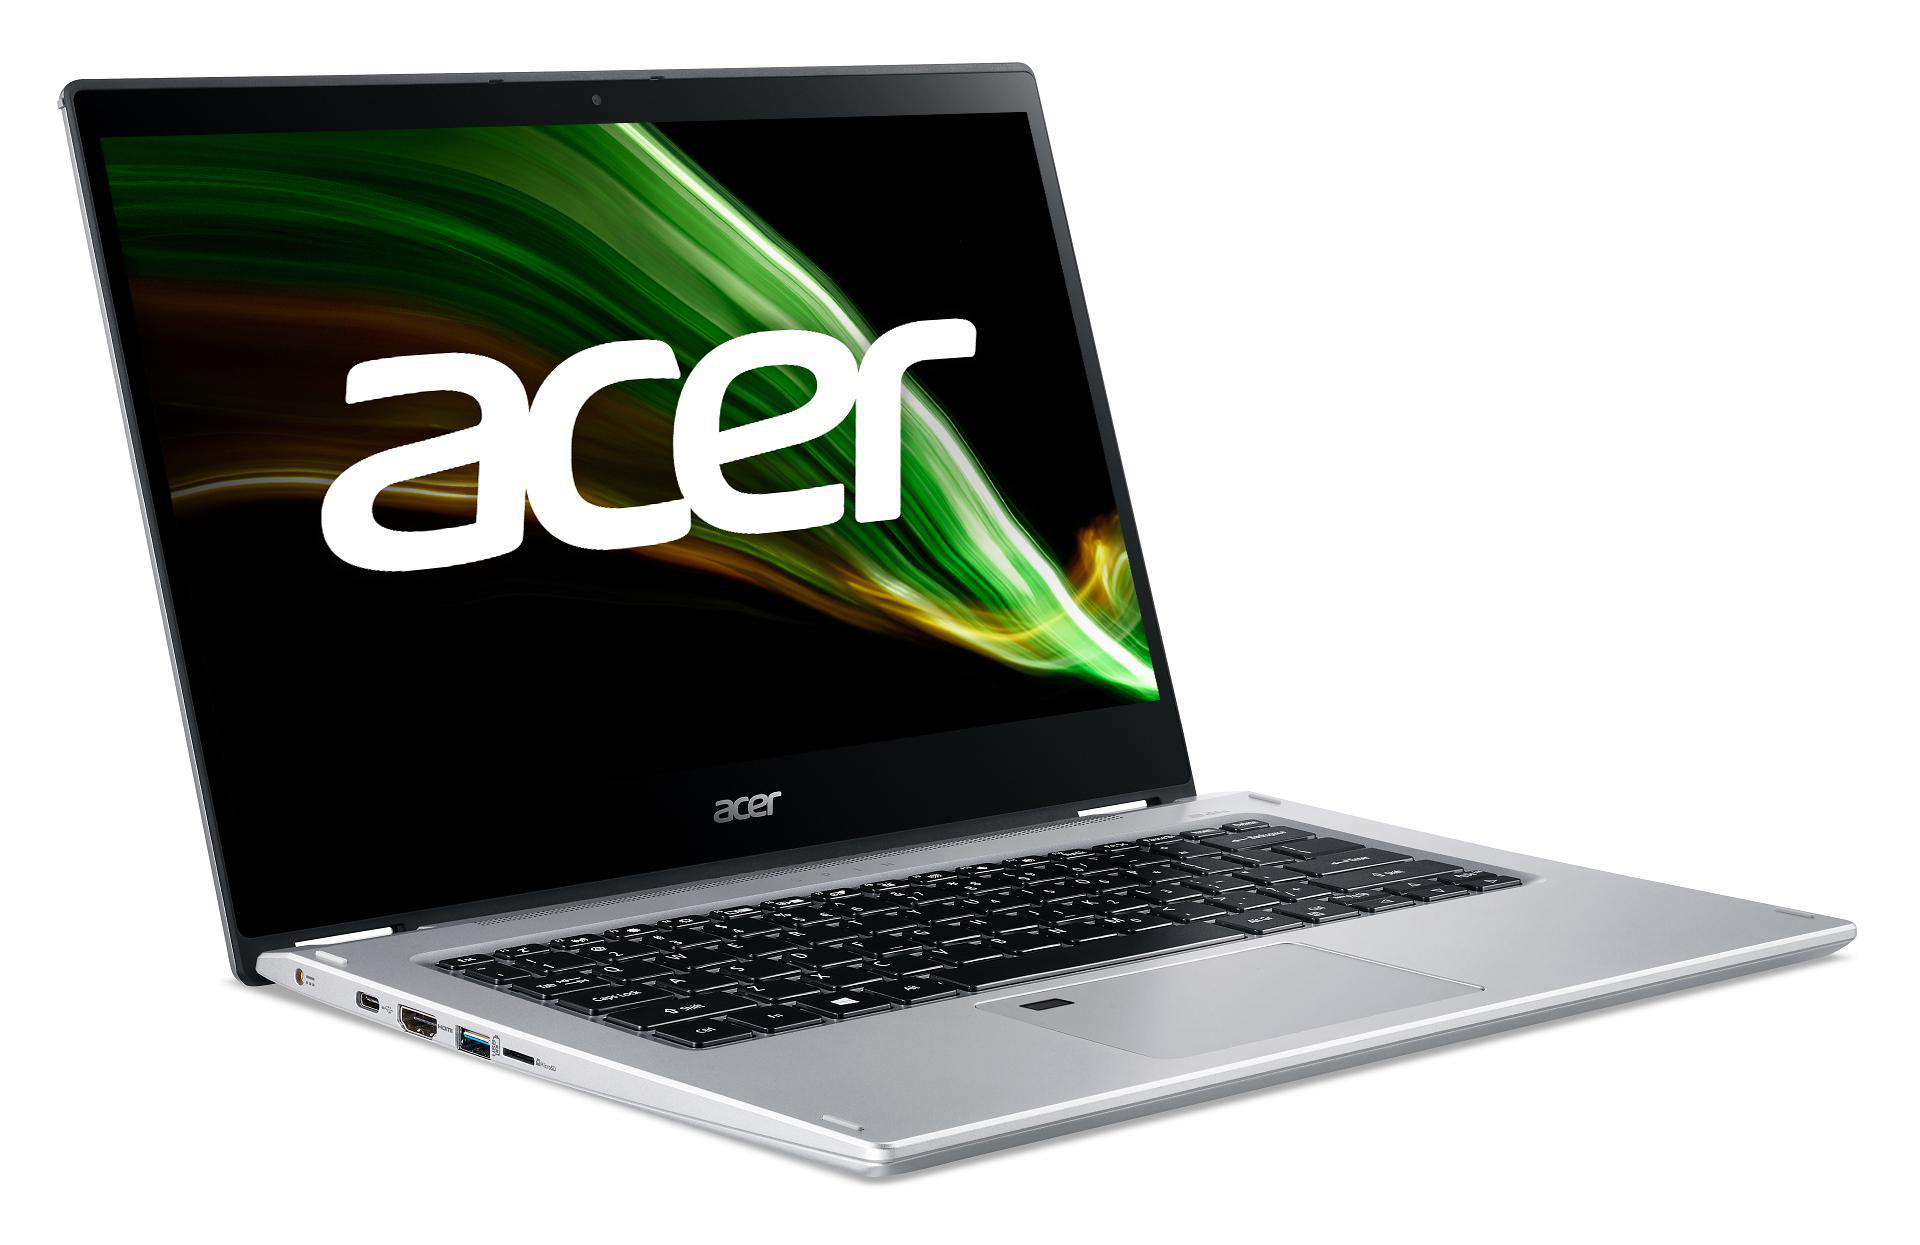 Home 3 RAM, Radeon™ S-Modus Zoll Silver Touchscreen, Spin GB Notebook, Silber SSD, AMD, 14 Windows AMD Bit) Prozessor, 4 GB mit Athlon™ Onboard Acer 10 (64 (SP314-21N-R686), 128 Display ACER Graphics,